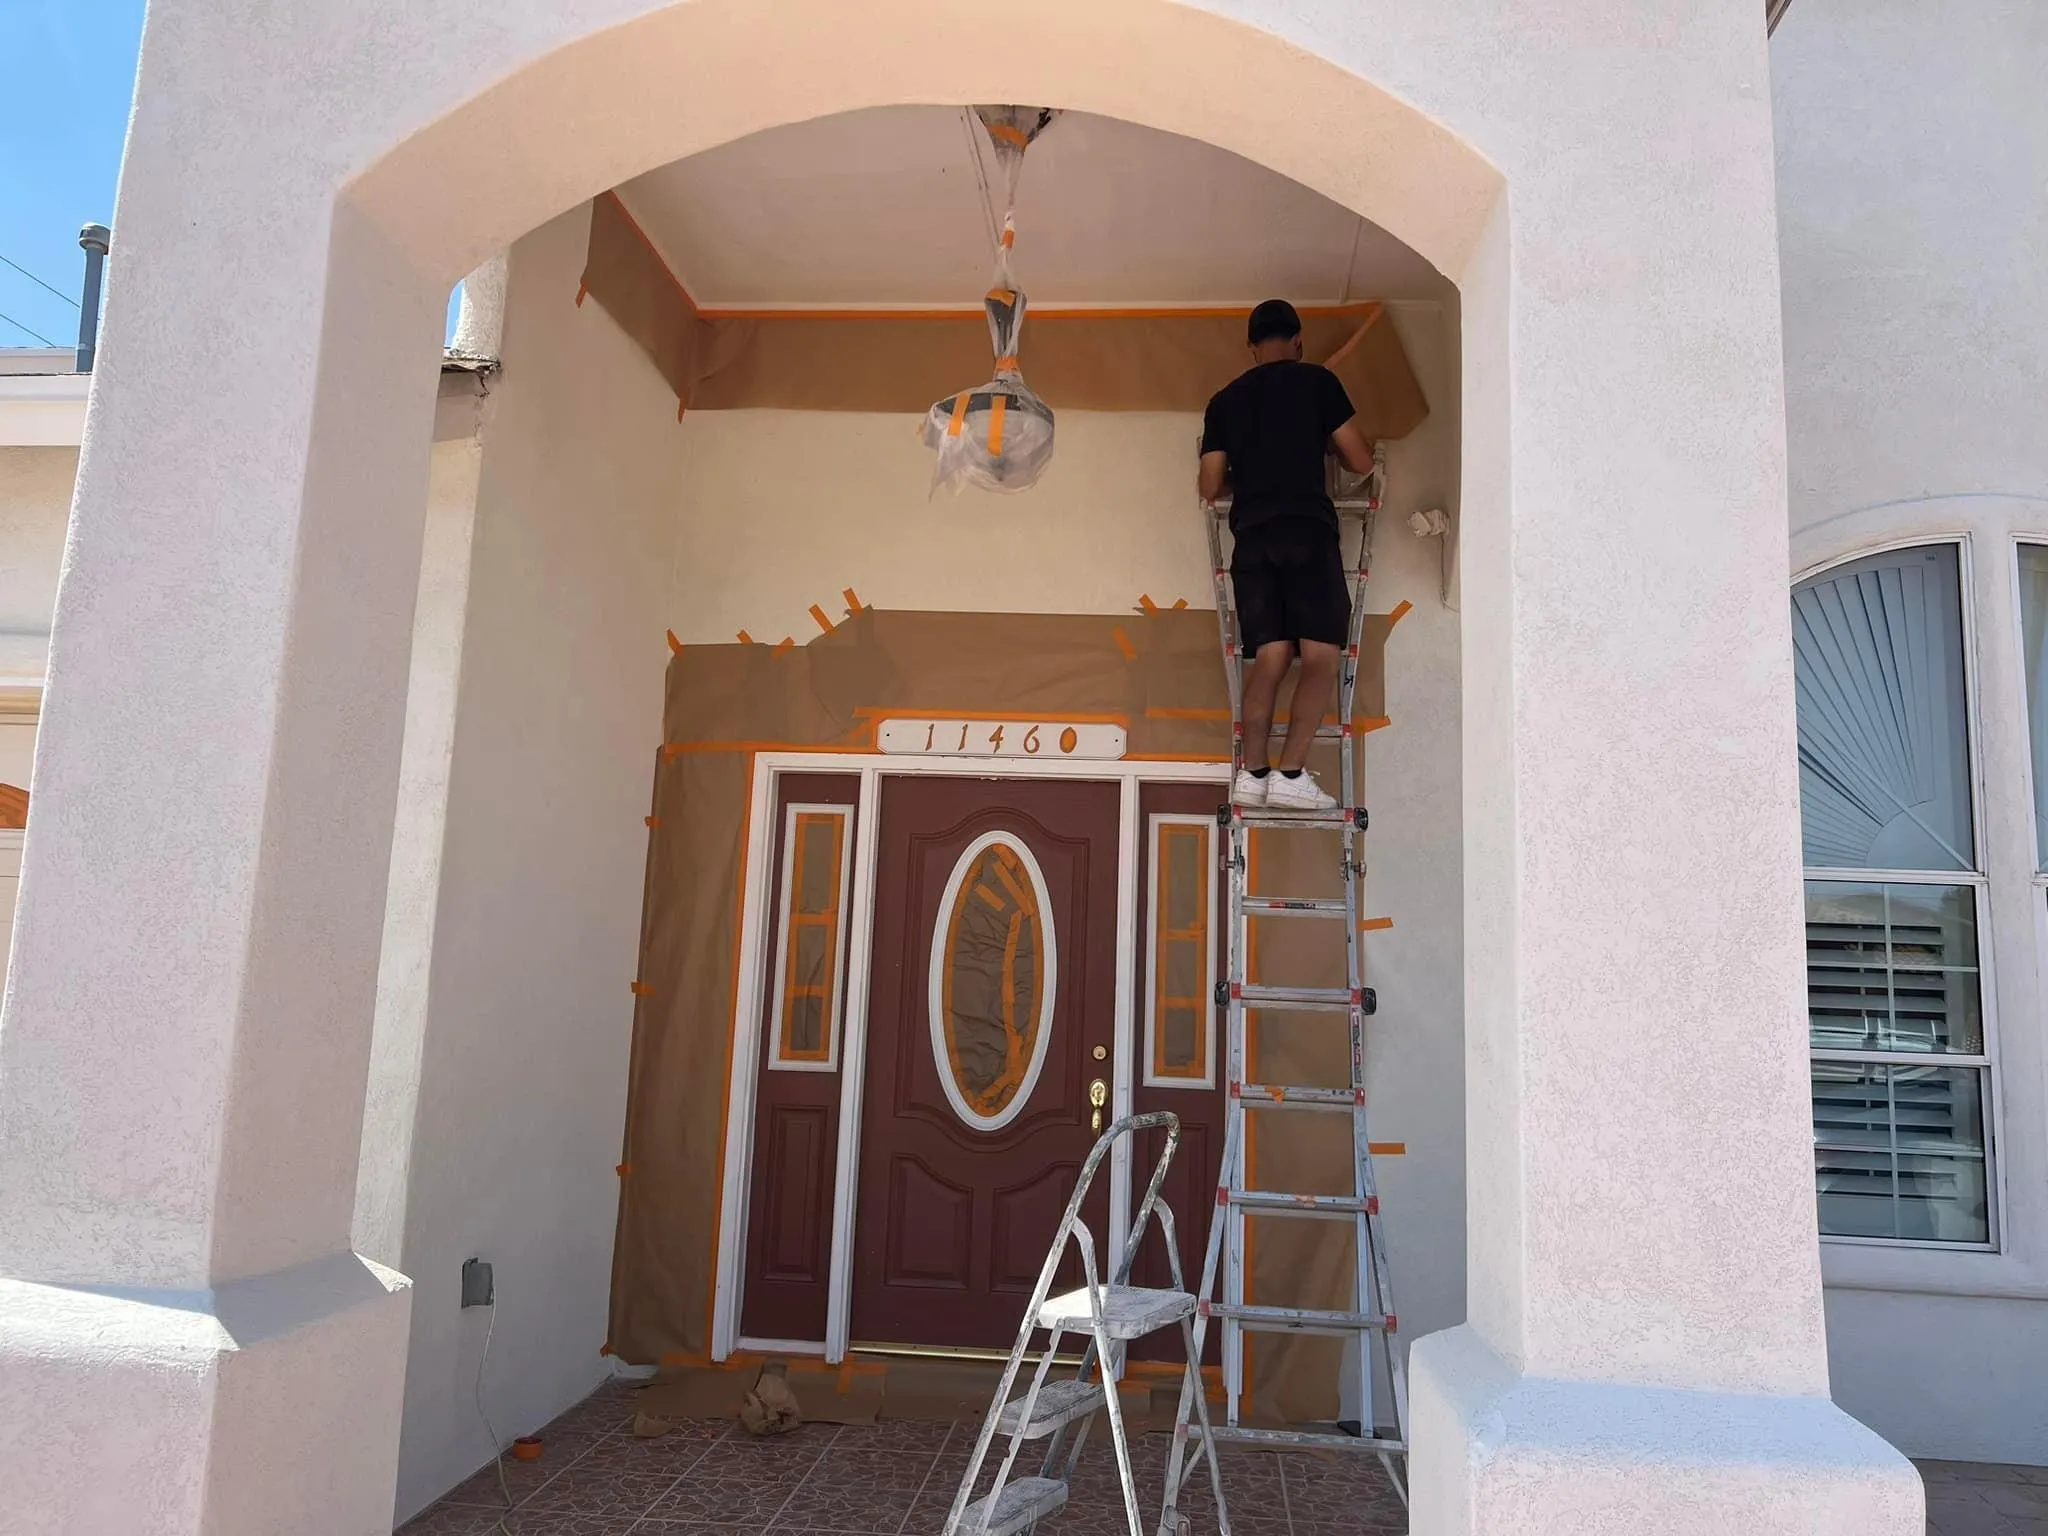 Drywall and Plastering for American Harbor Painting in Fort Worth, Texas